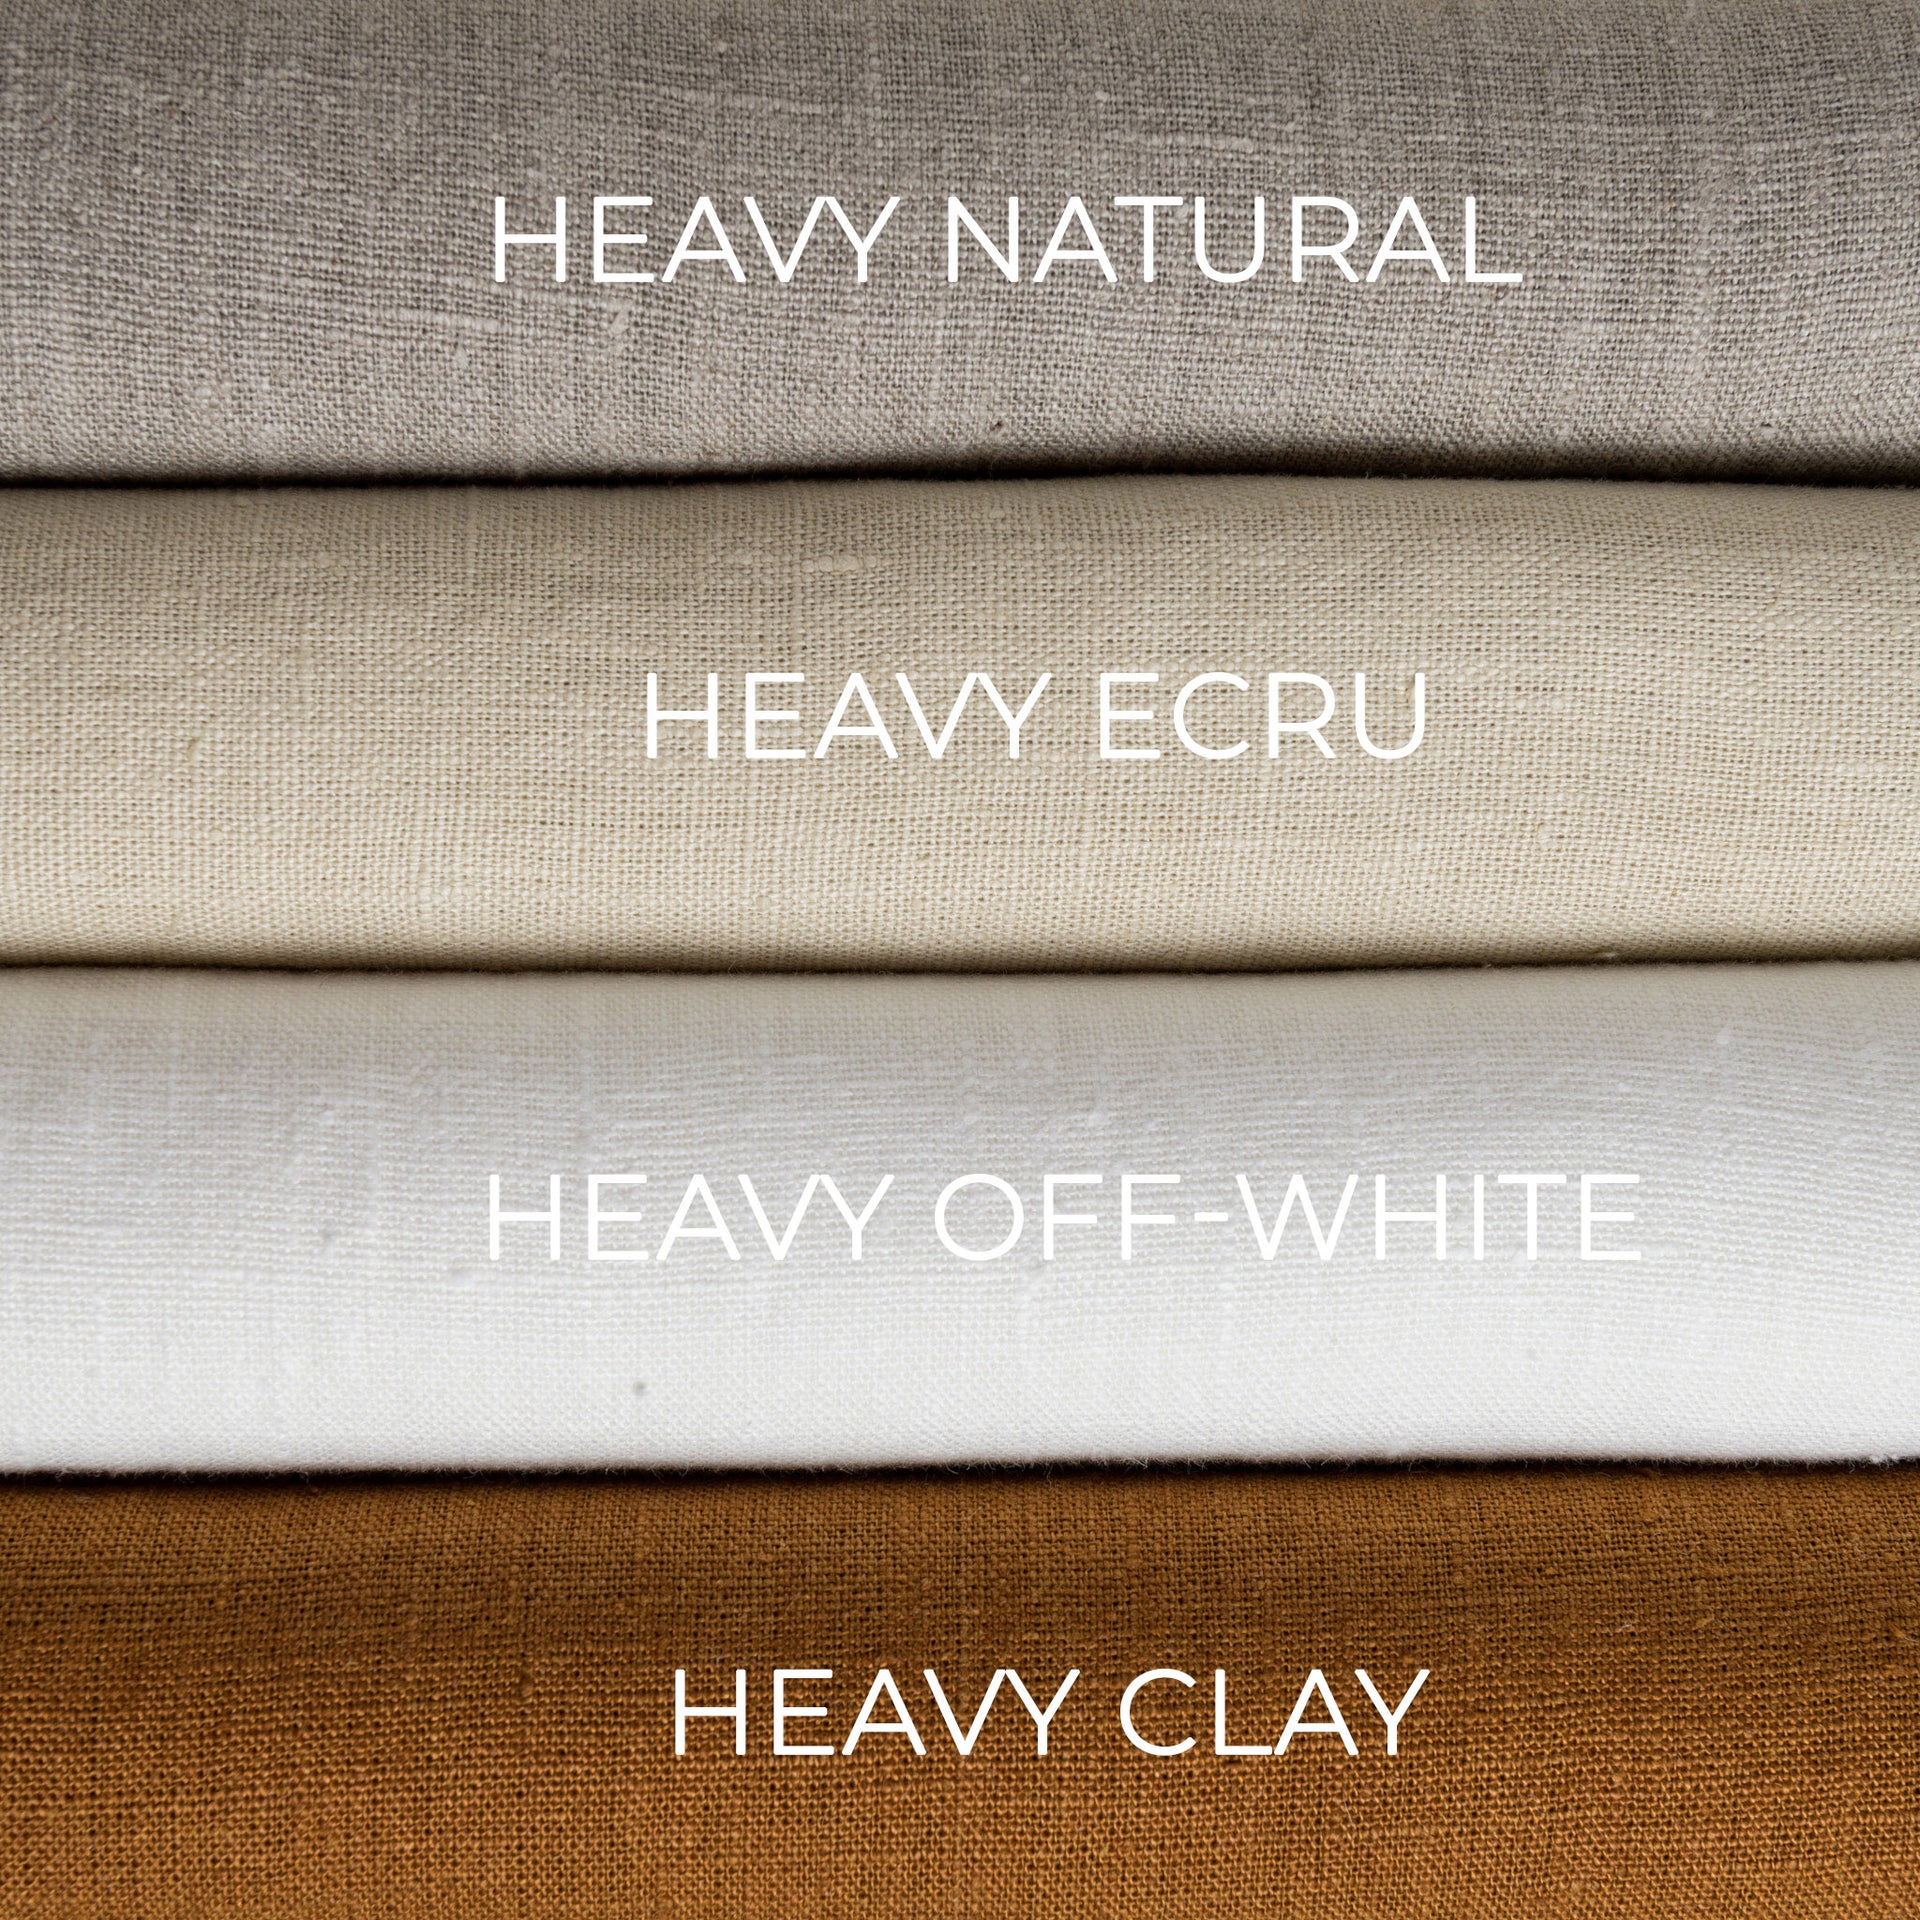 @Color: Heavy Weight Natural, Color: Heavy Weight Ecru, Color: Heavy Weight Off-White, Color: Heavy Weight Clay, TOP & BOTTOM COLOR: Heavy Weight Natural, TOP & BOTTOM COLOR: Heavy Weight Ecru, TOP & BOTTOM COLOR: Heavy Weight Off-White. TOP & BOTTOM COLOR: Heavy Weight Clay